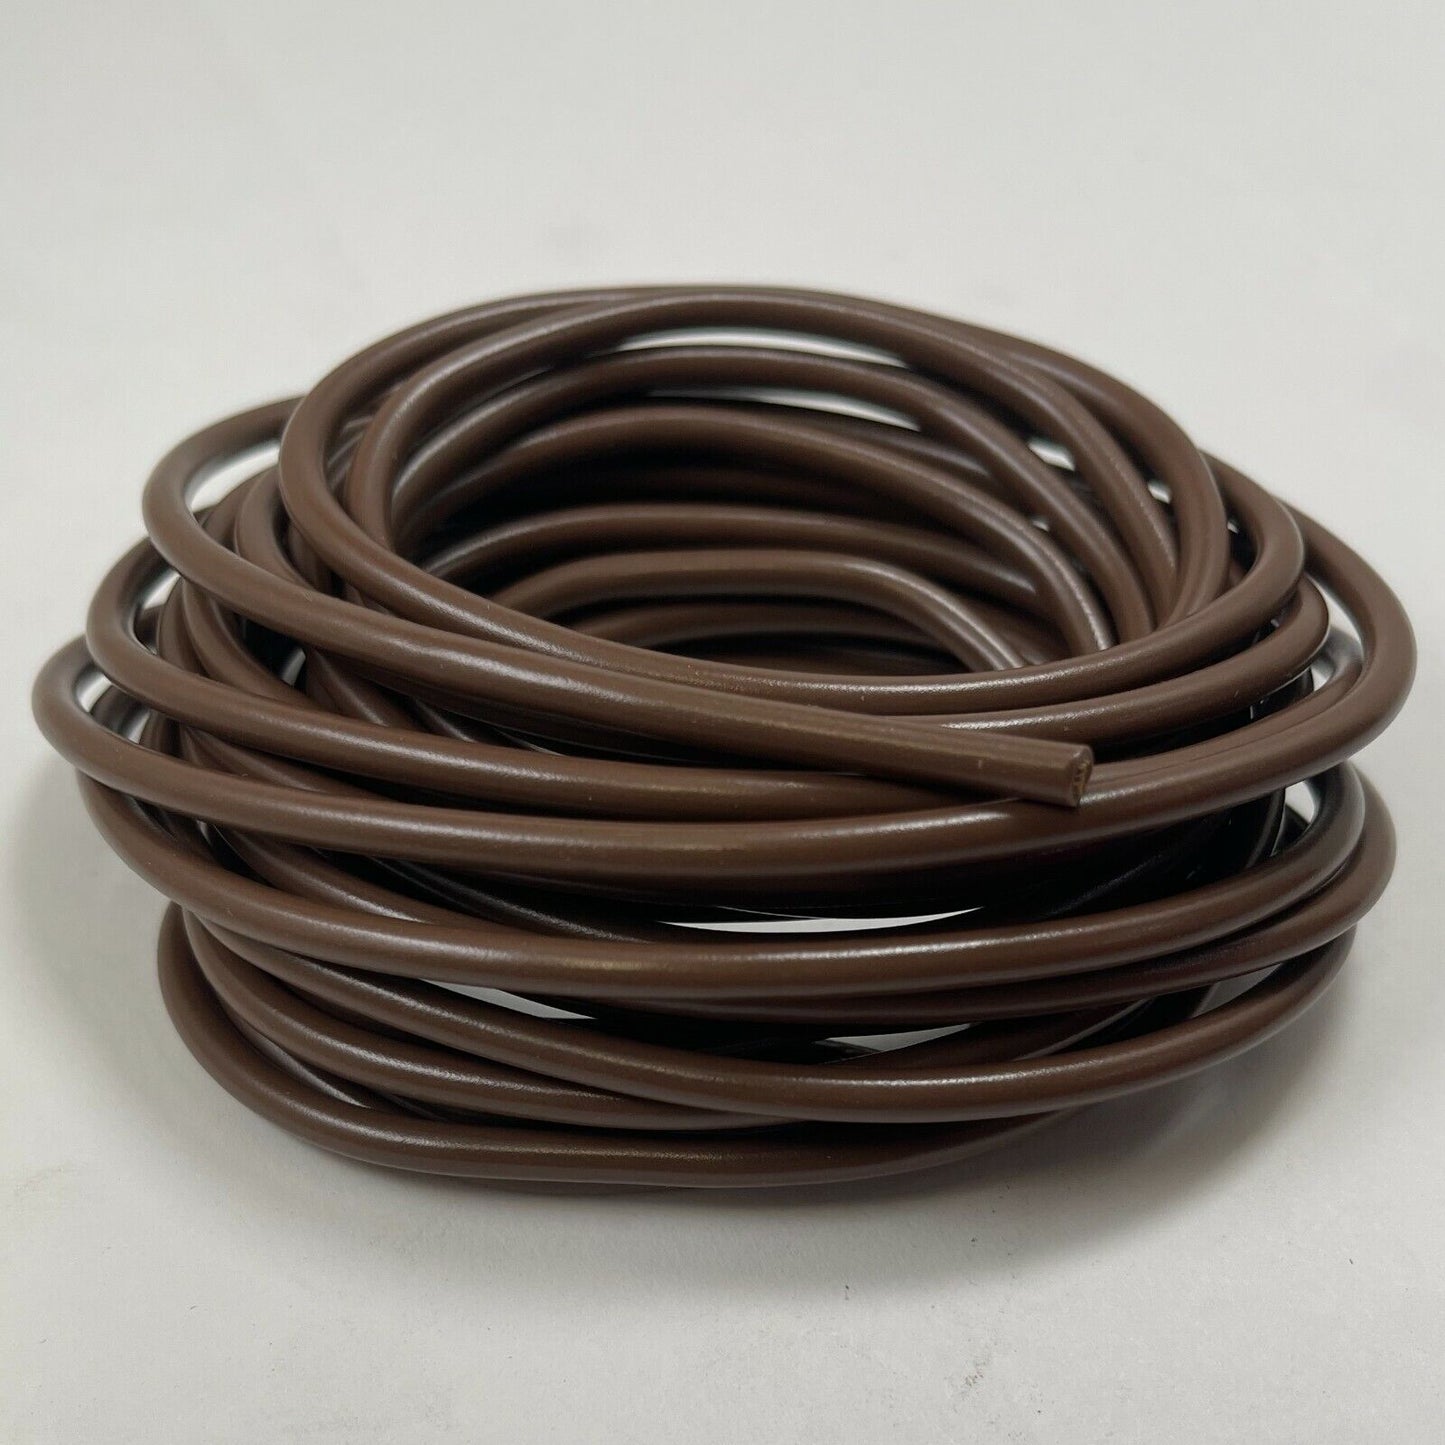 2 Pack of Automotive Primary Wire 10 Gauge 10 FT - Brown